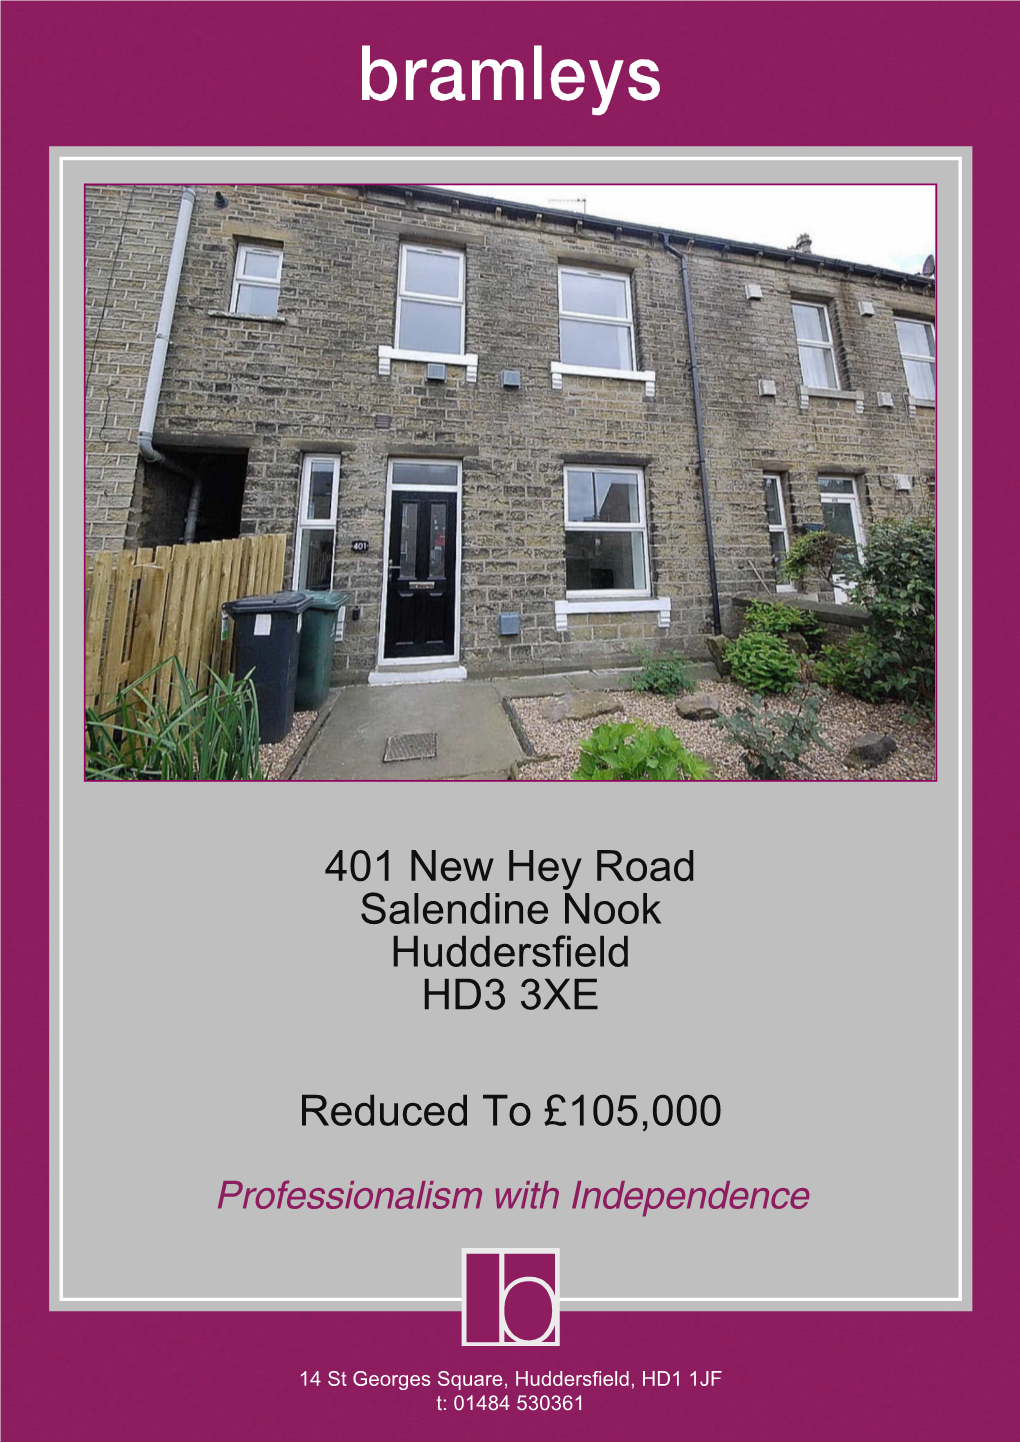 401 New Hey Road Salendine Nook Huddersfield HD3 3XE Reduced To